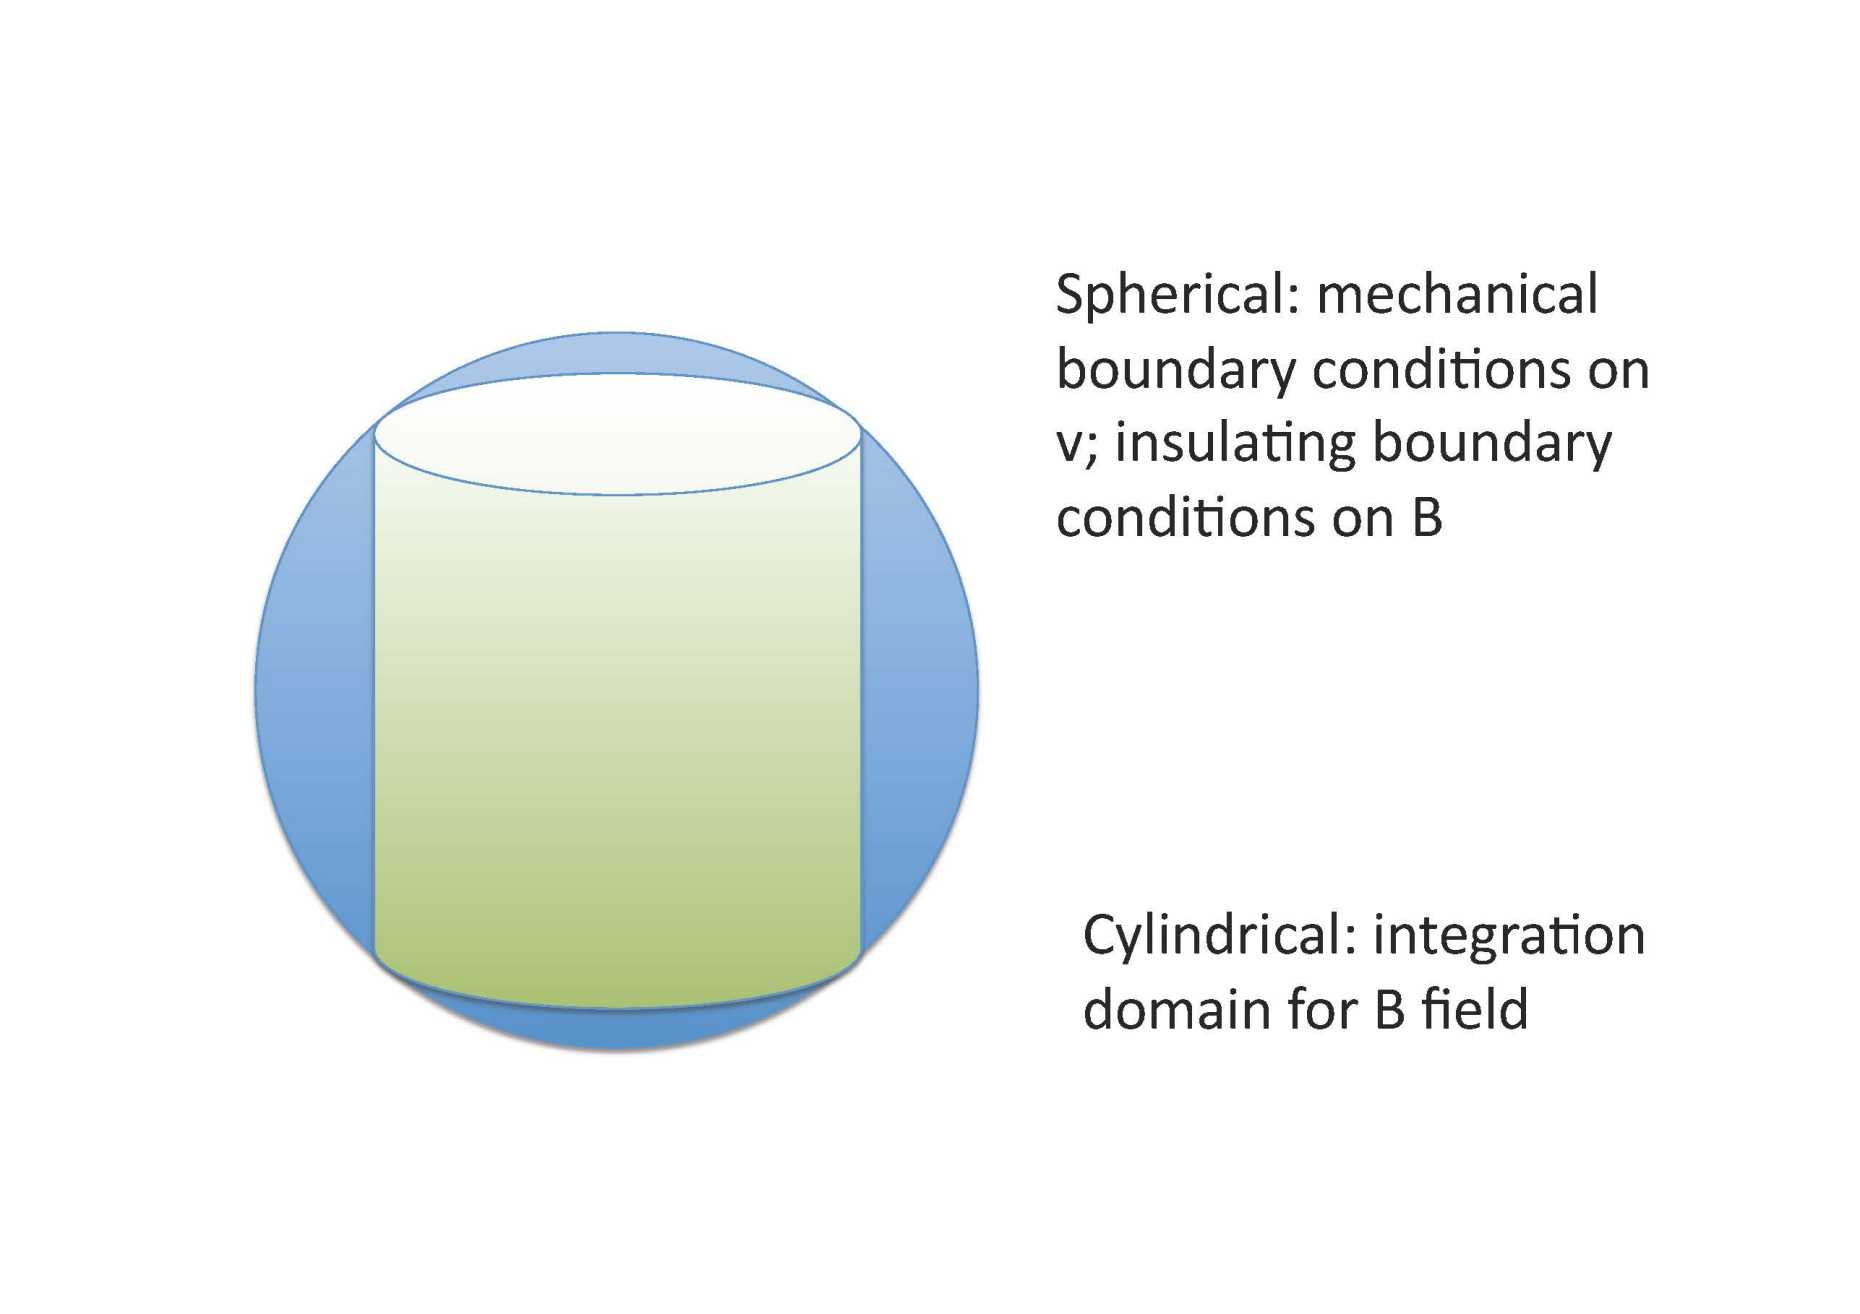 Enlarged view: Figure 1:In a planetary core, boundary conditions apply on spherical surfaces whereas Taylor's constraint applies on cylindrical surfaces